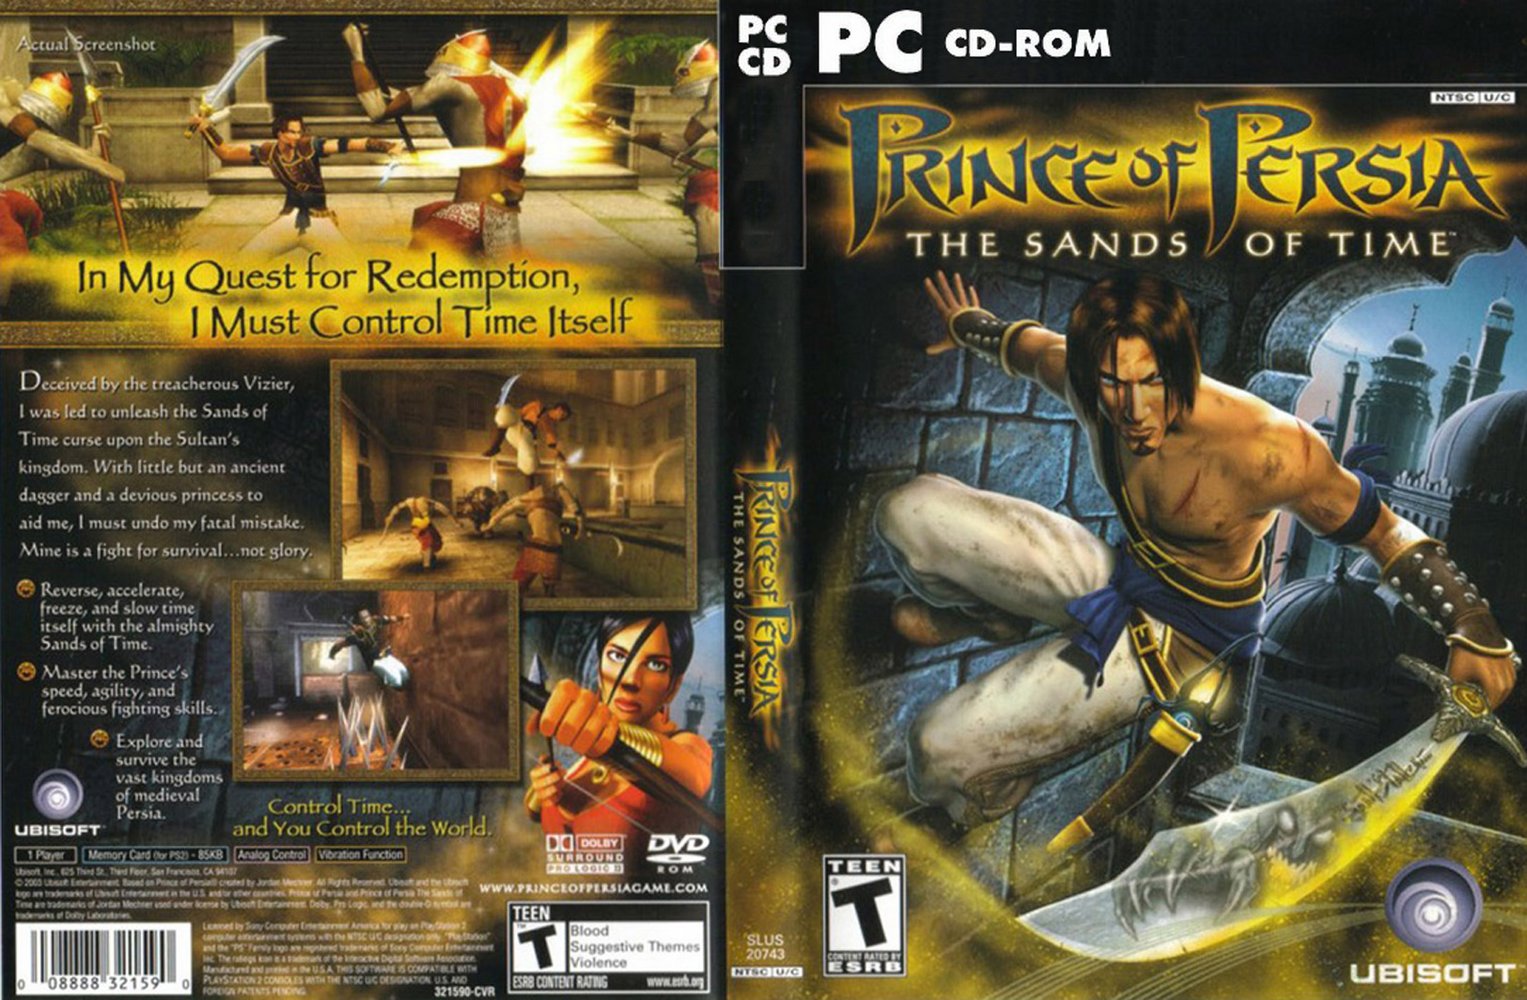 Prince of persia games to play